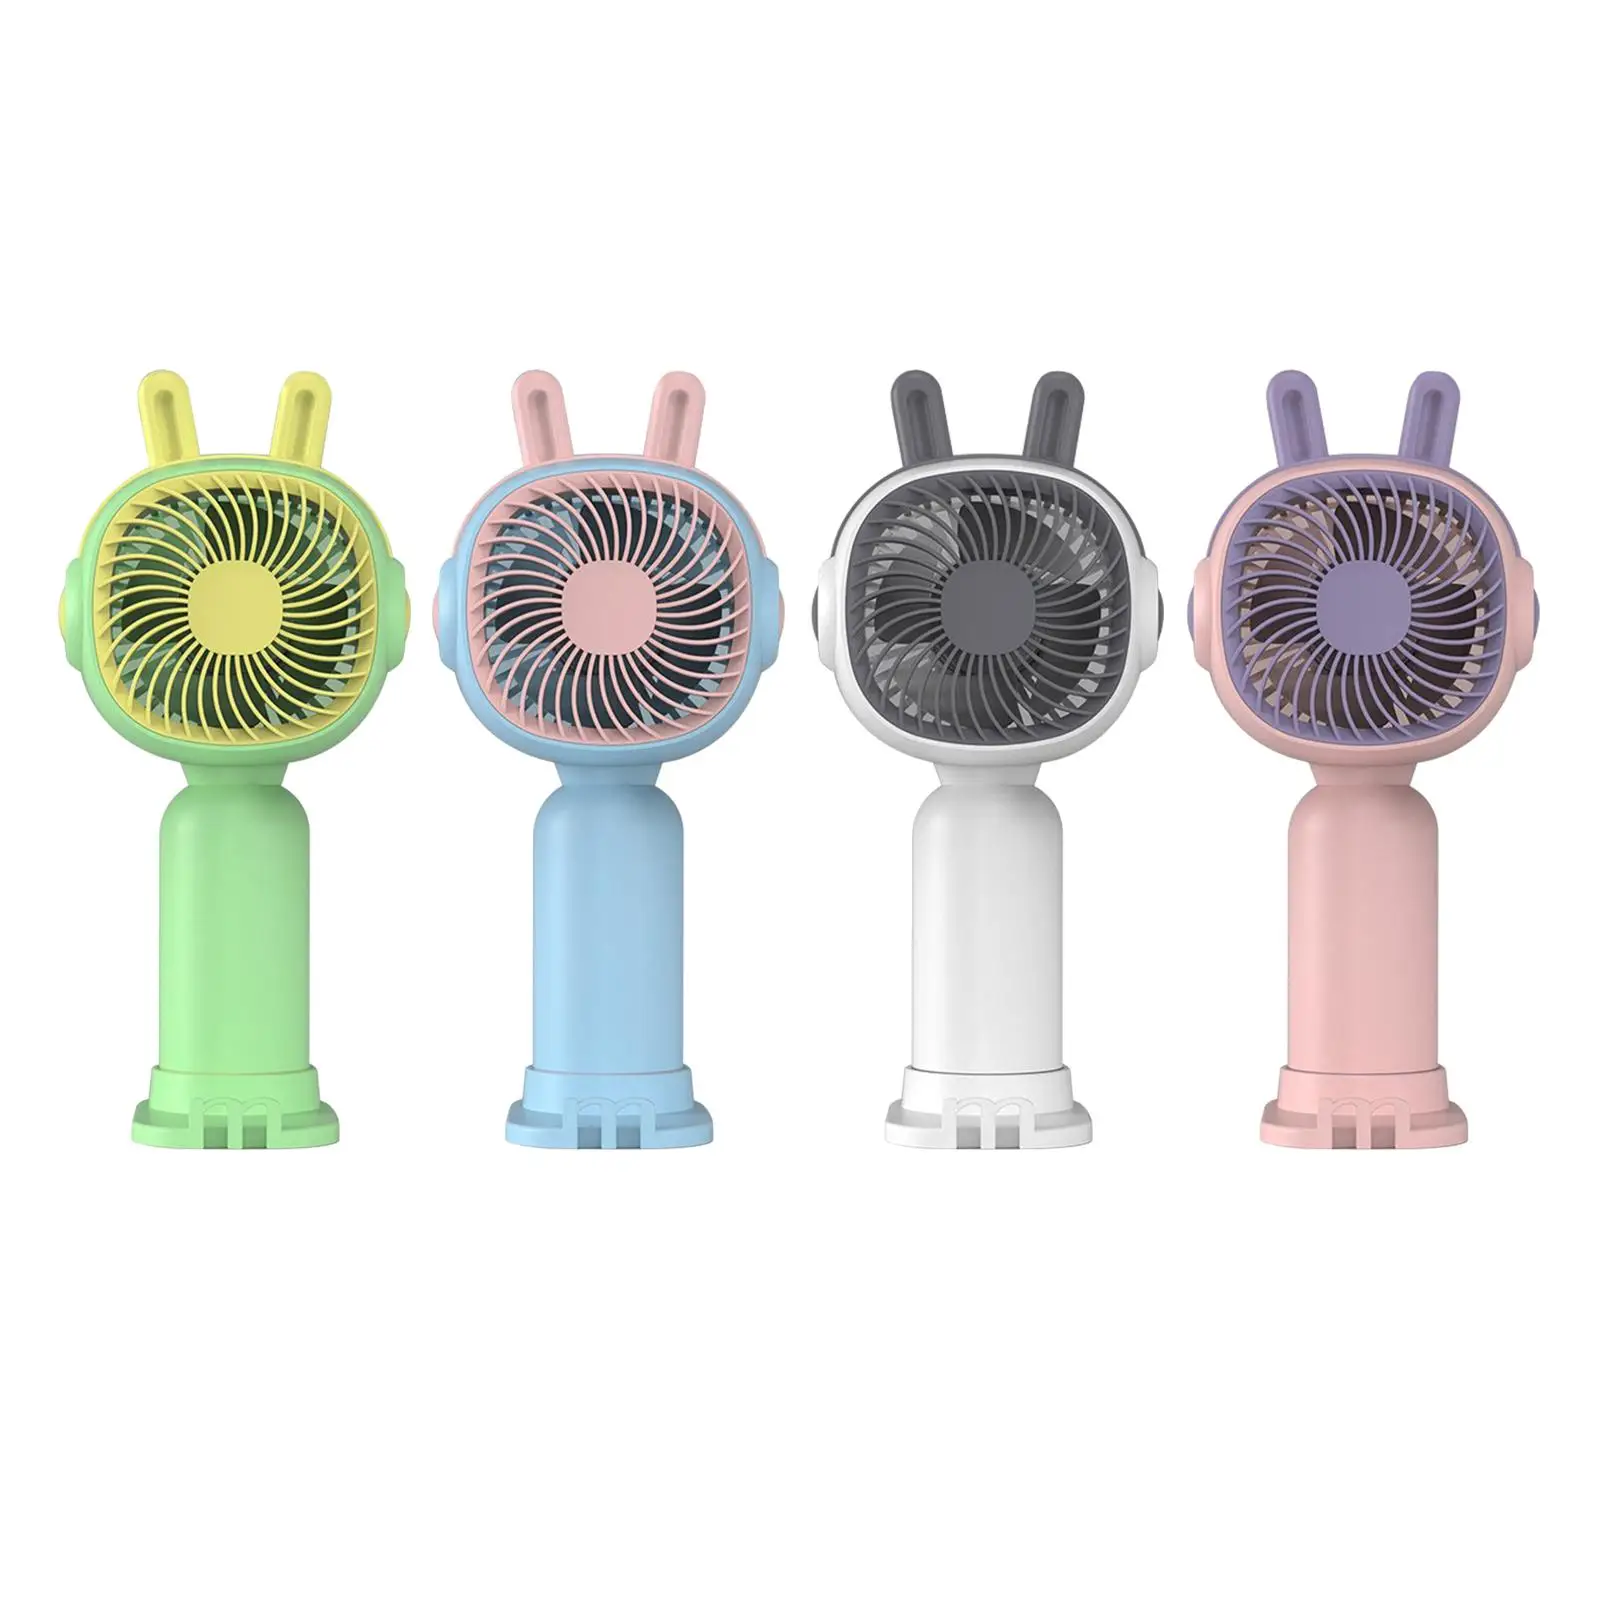 Personal Fan with Phone Stand Be Used as A Mobile Phone Holder Cute Mini Portable Fan for Dormitory Kitchen Summer Sports Hiking